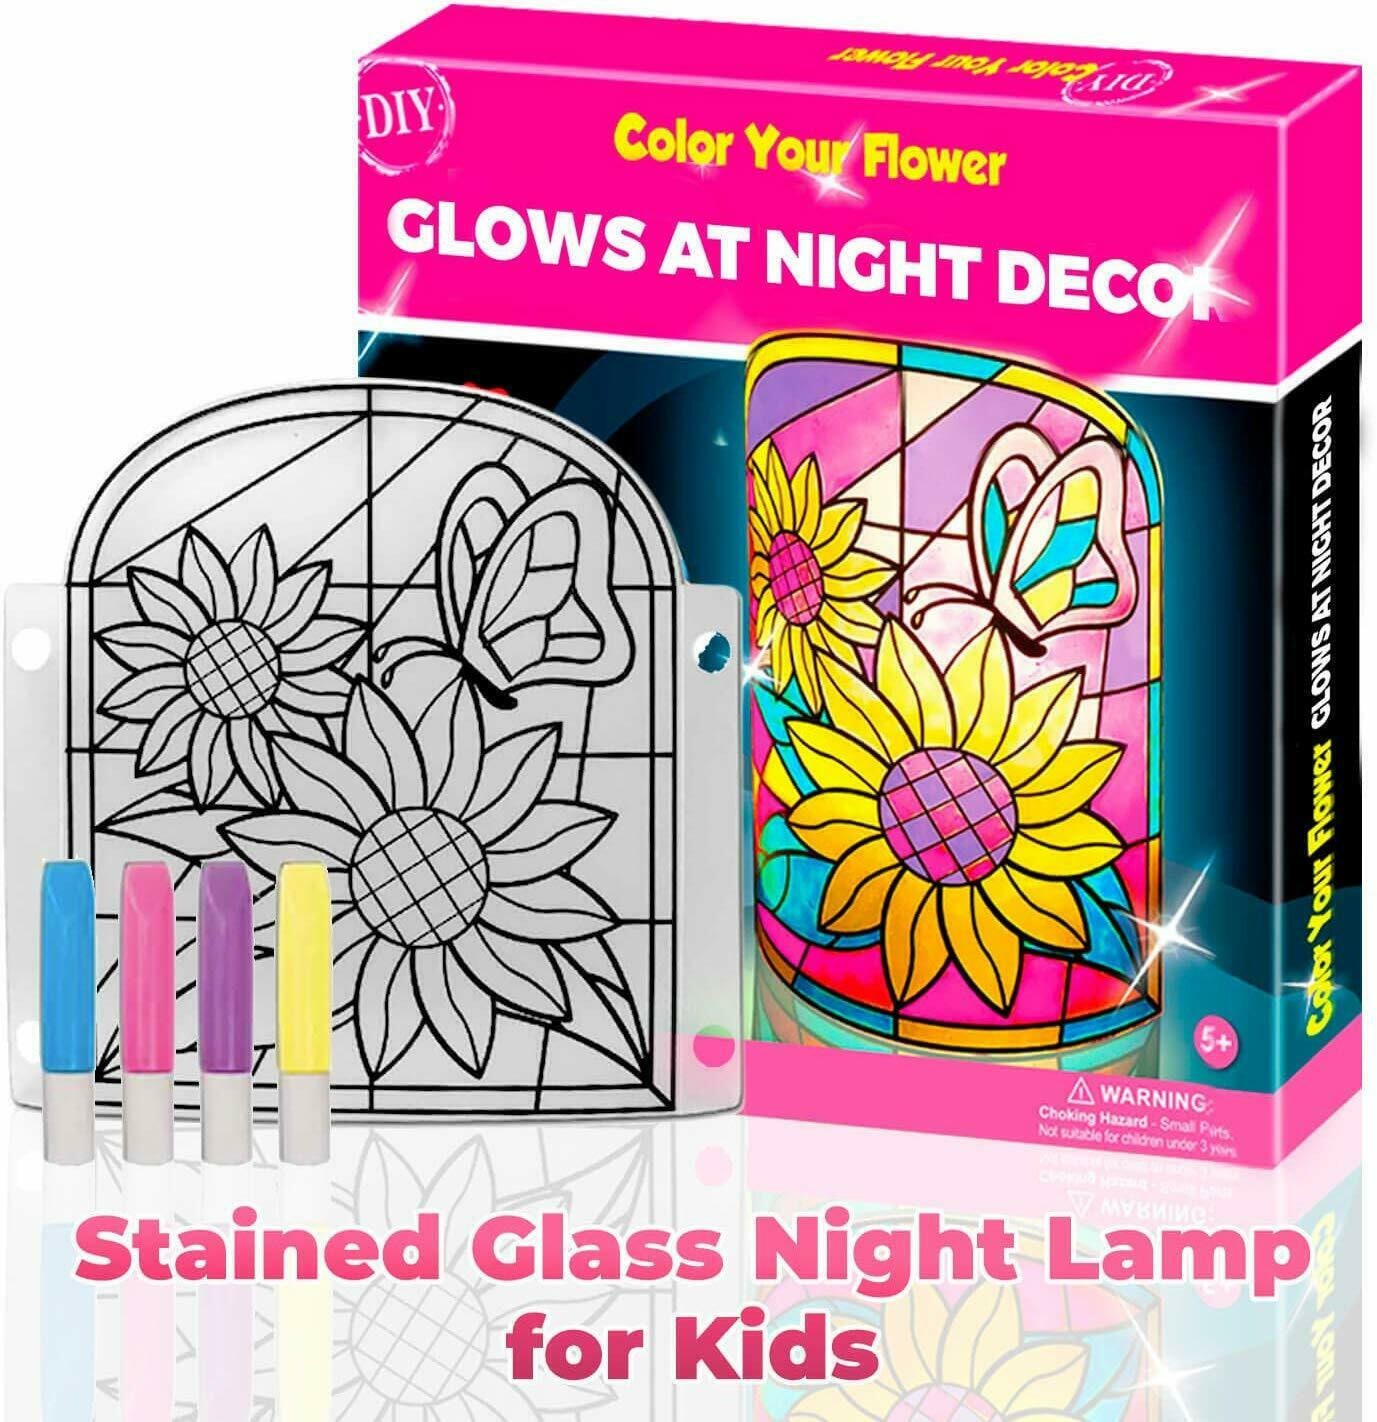  Kids NightLamp DIY Kit- Creative Arts and Crafts for Girls and  Boys Ages 5 Years and up- Stained Glass lamp with Window Paint and Circuit  - Best Gift Art Kits (Butterfly) 